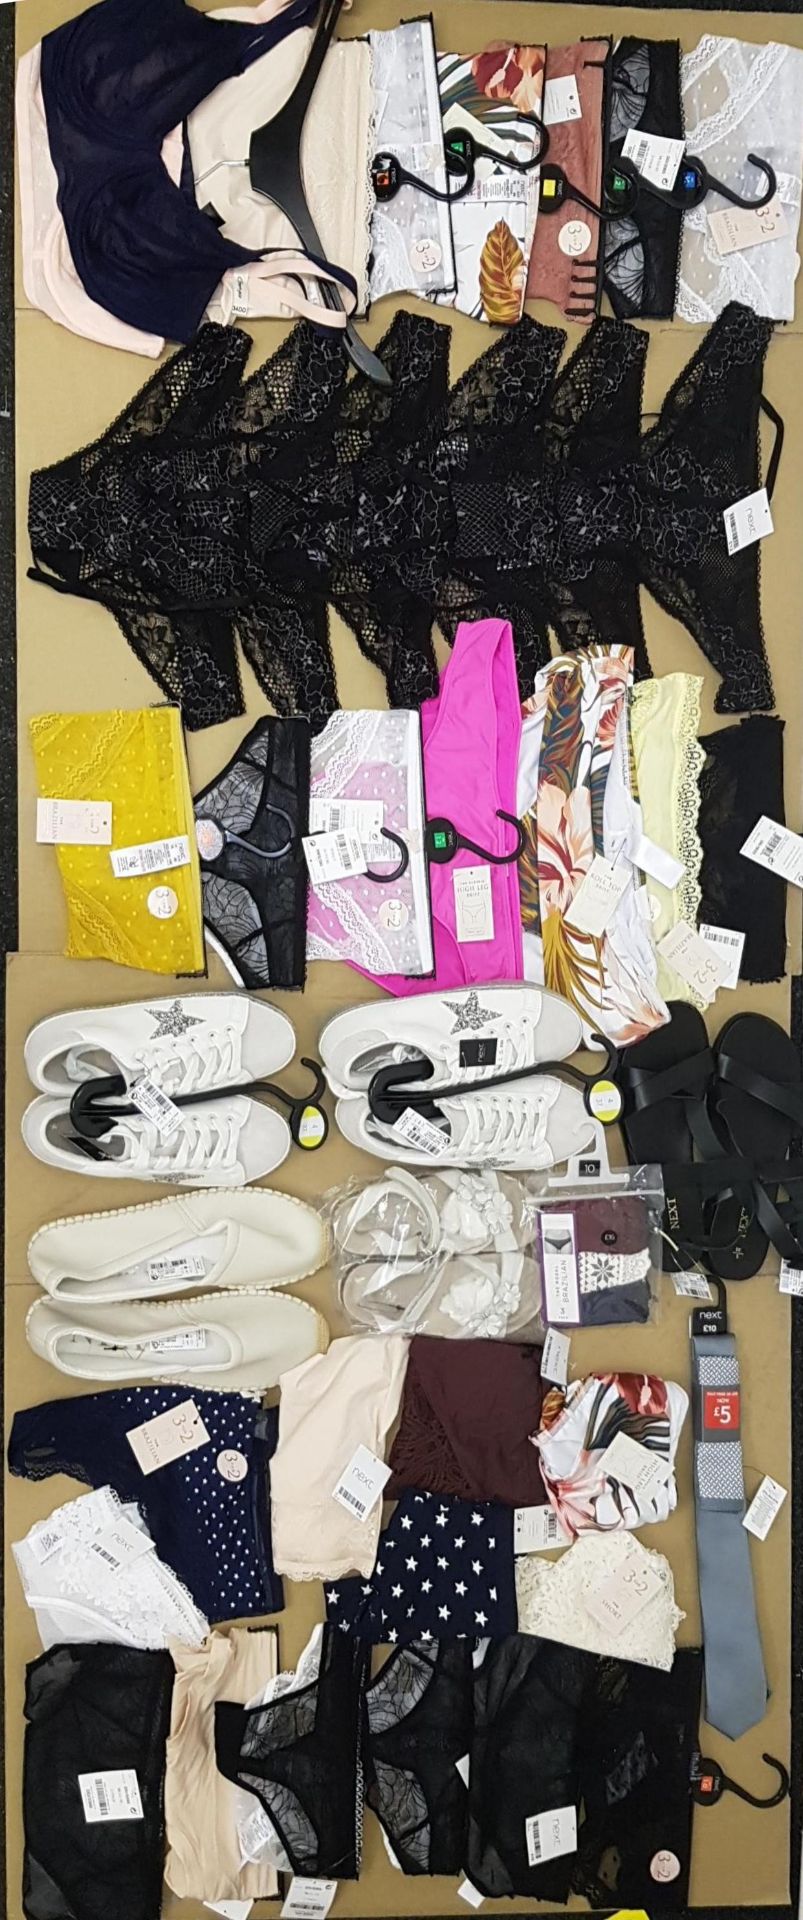 ONE LOT TO CONTAIN 40 ITEMS COMBINED RRP £477 (1064)Condition ReportALL ITEMS ARE BRAND NEW WITH - Image 2 of 2